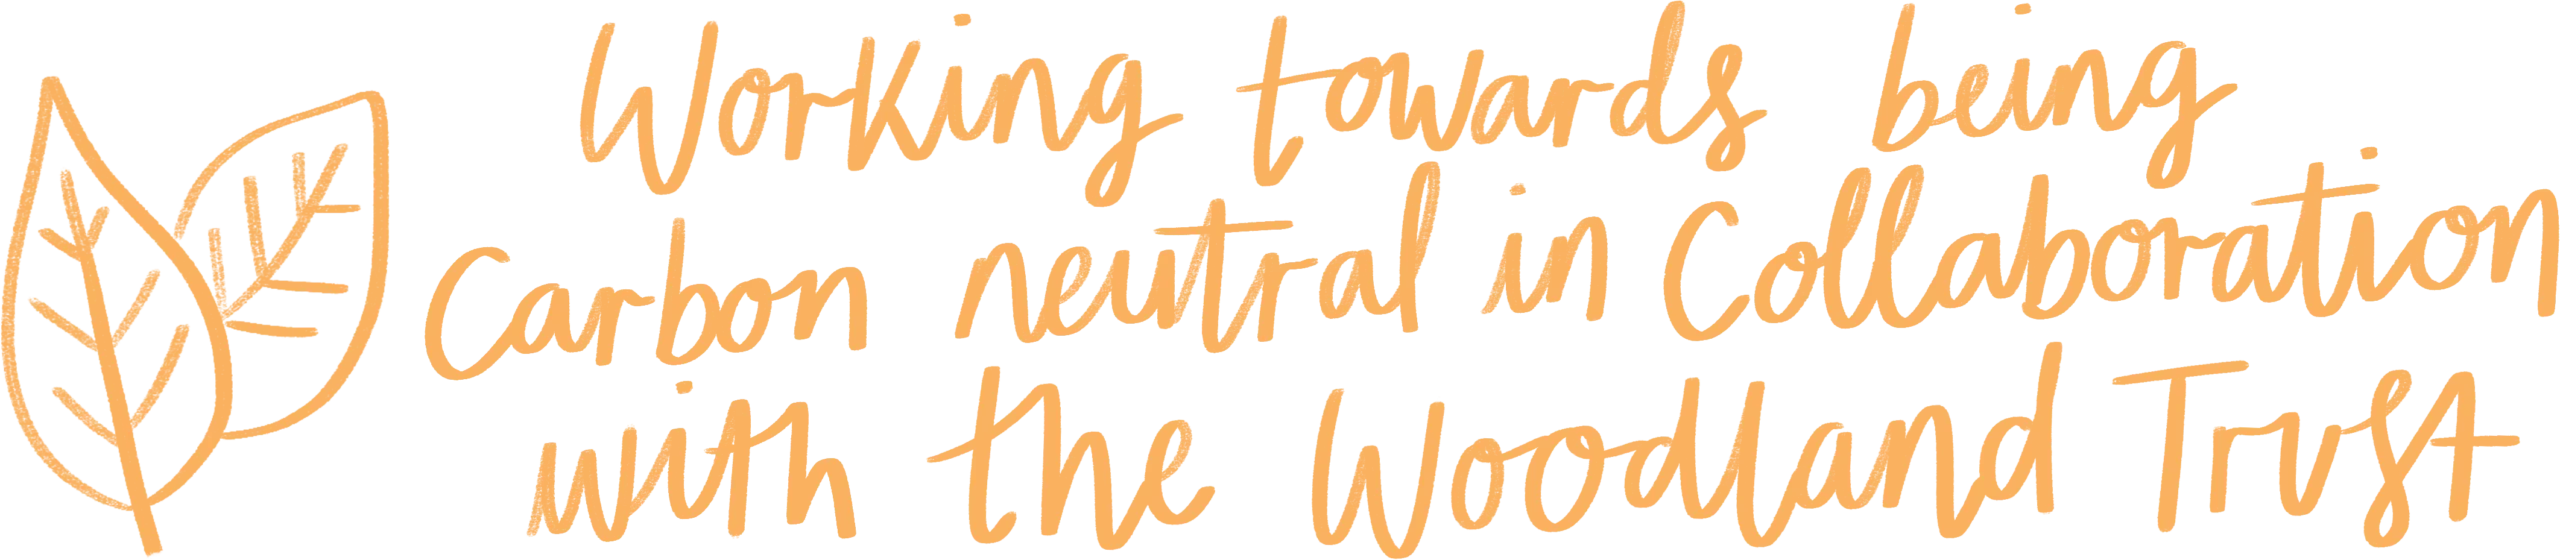 Working towards being carbon neutral with woodland trust